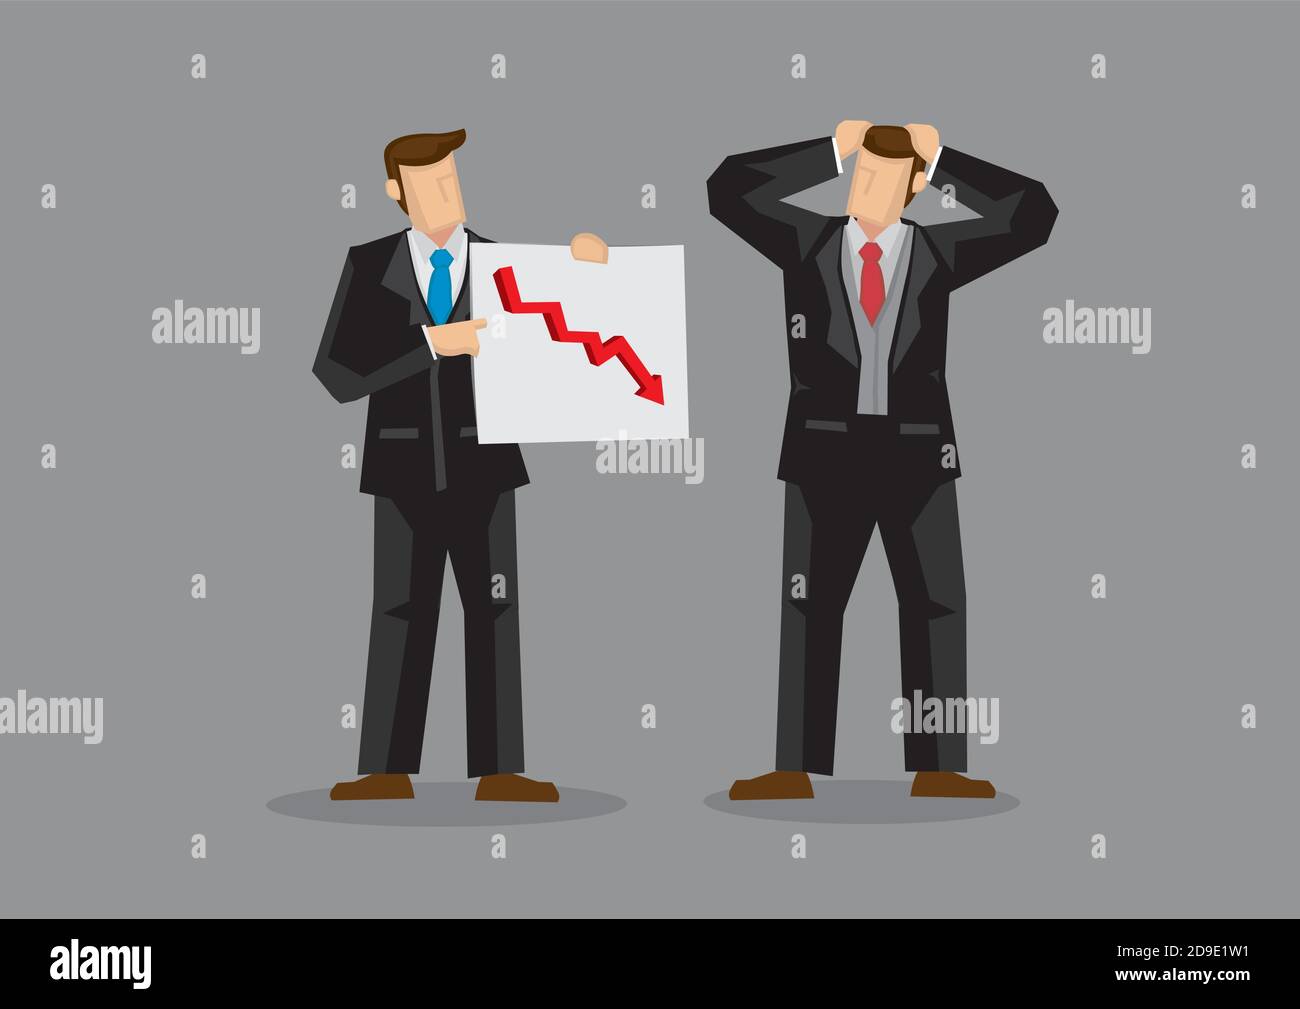 Businessmen with chart showing downward trend feeling stressed about declining business. Cartoon vector illustration on poor business performance conc Stock Vector